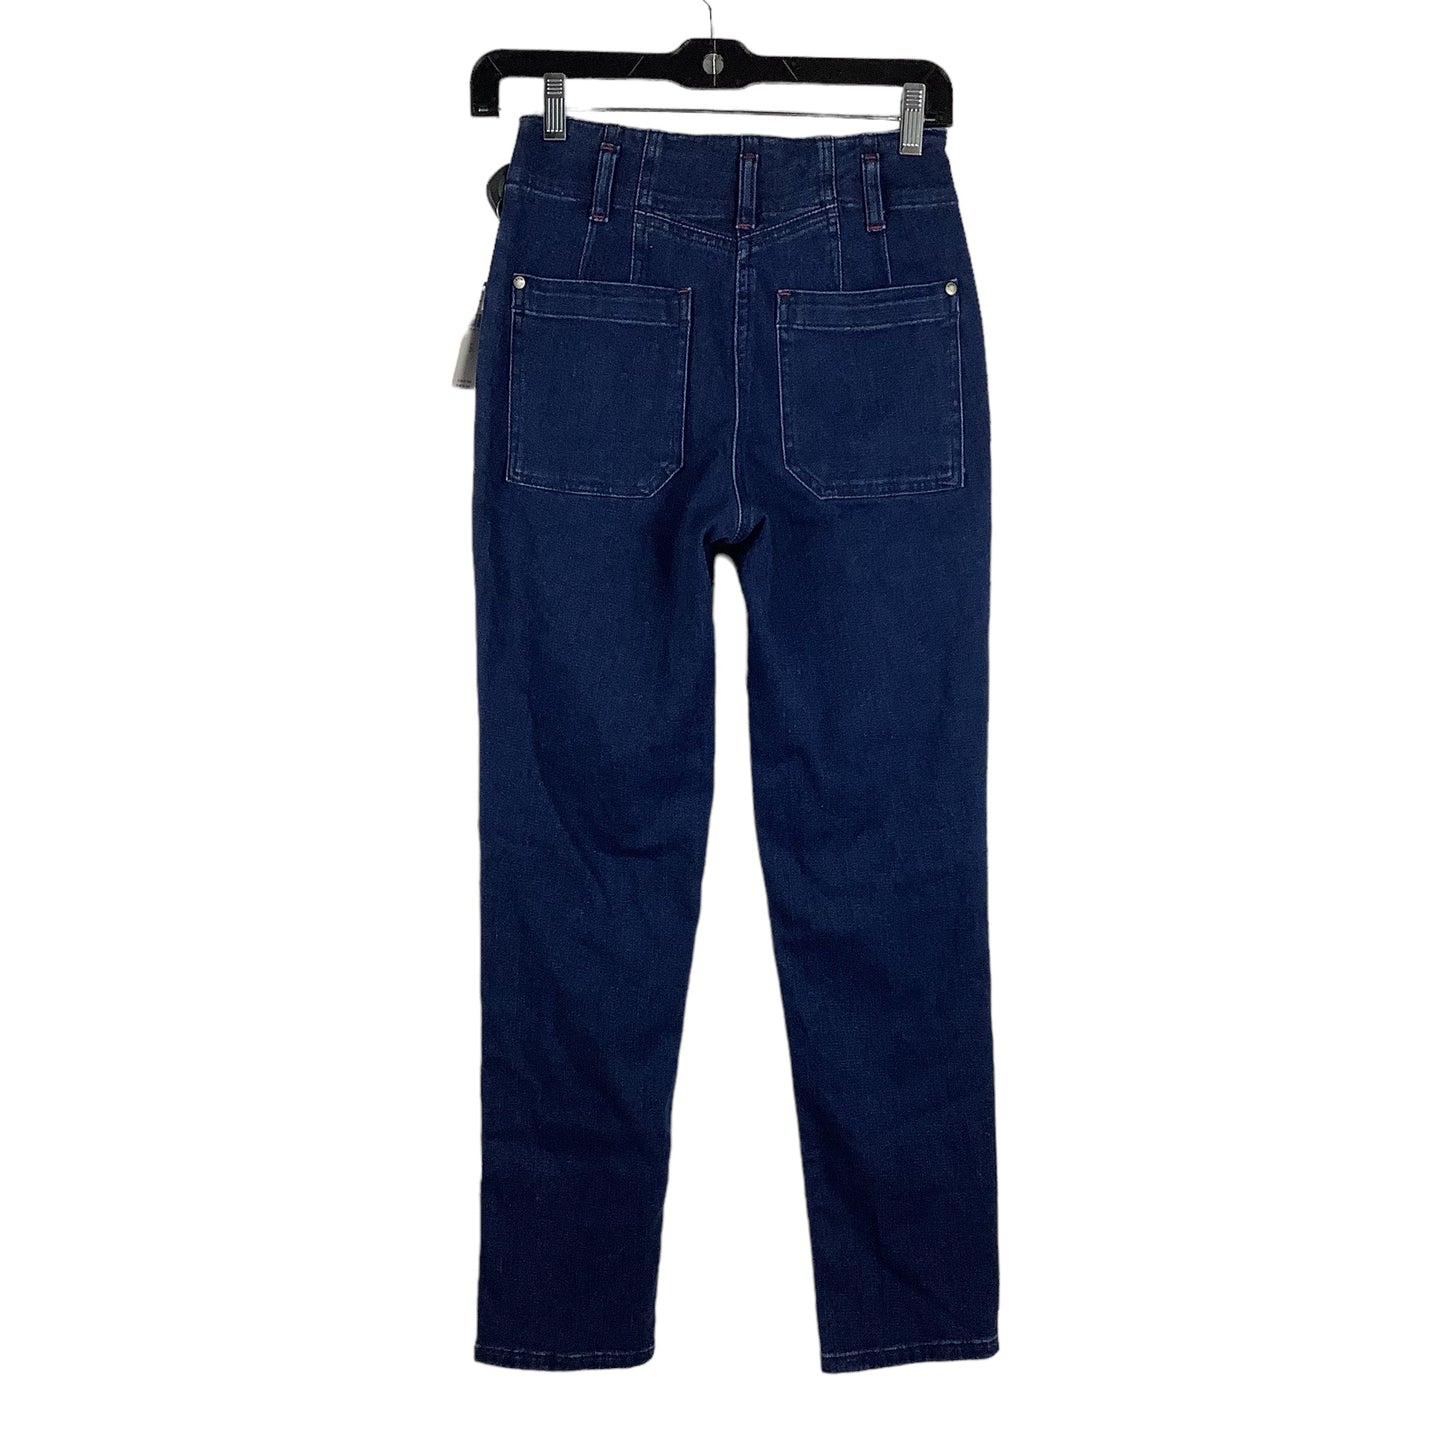 Blue Jeans Straight Maeve, Size 2